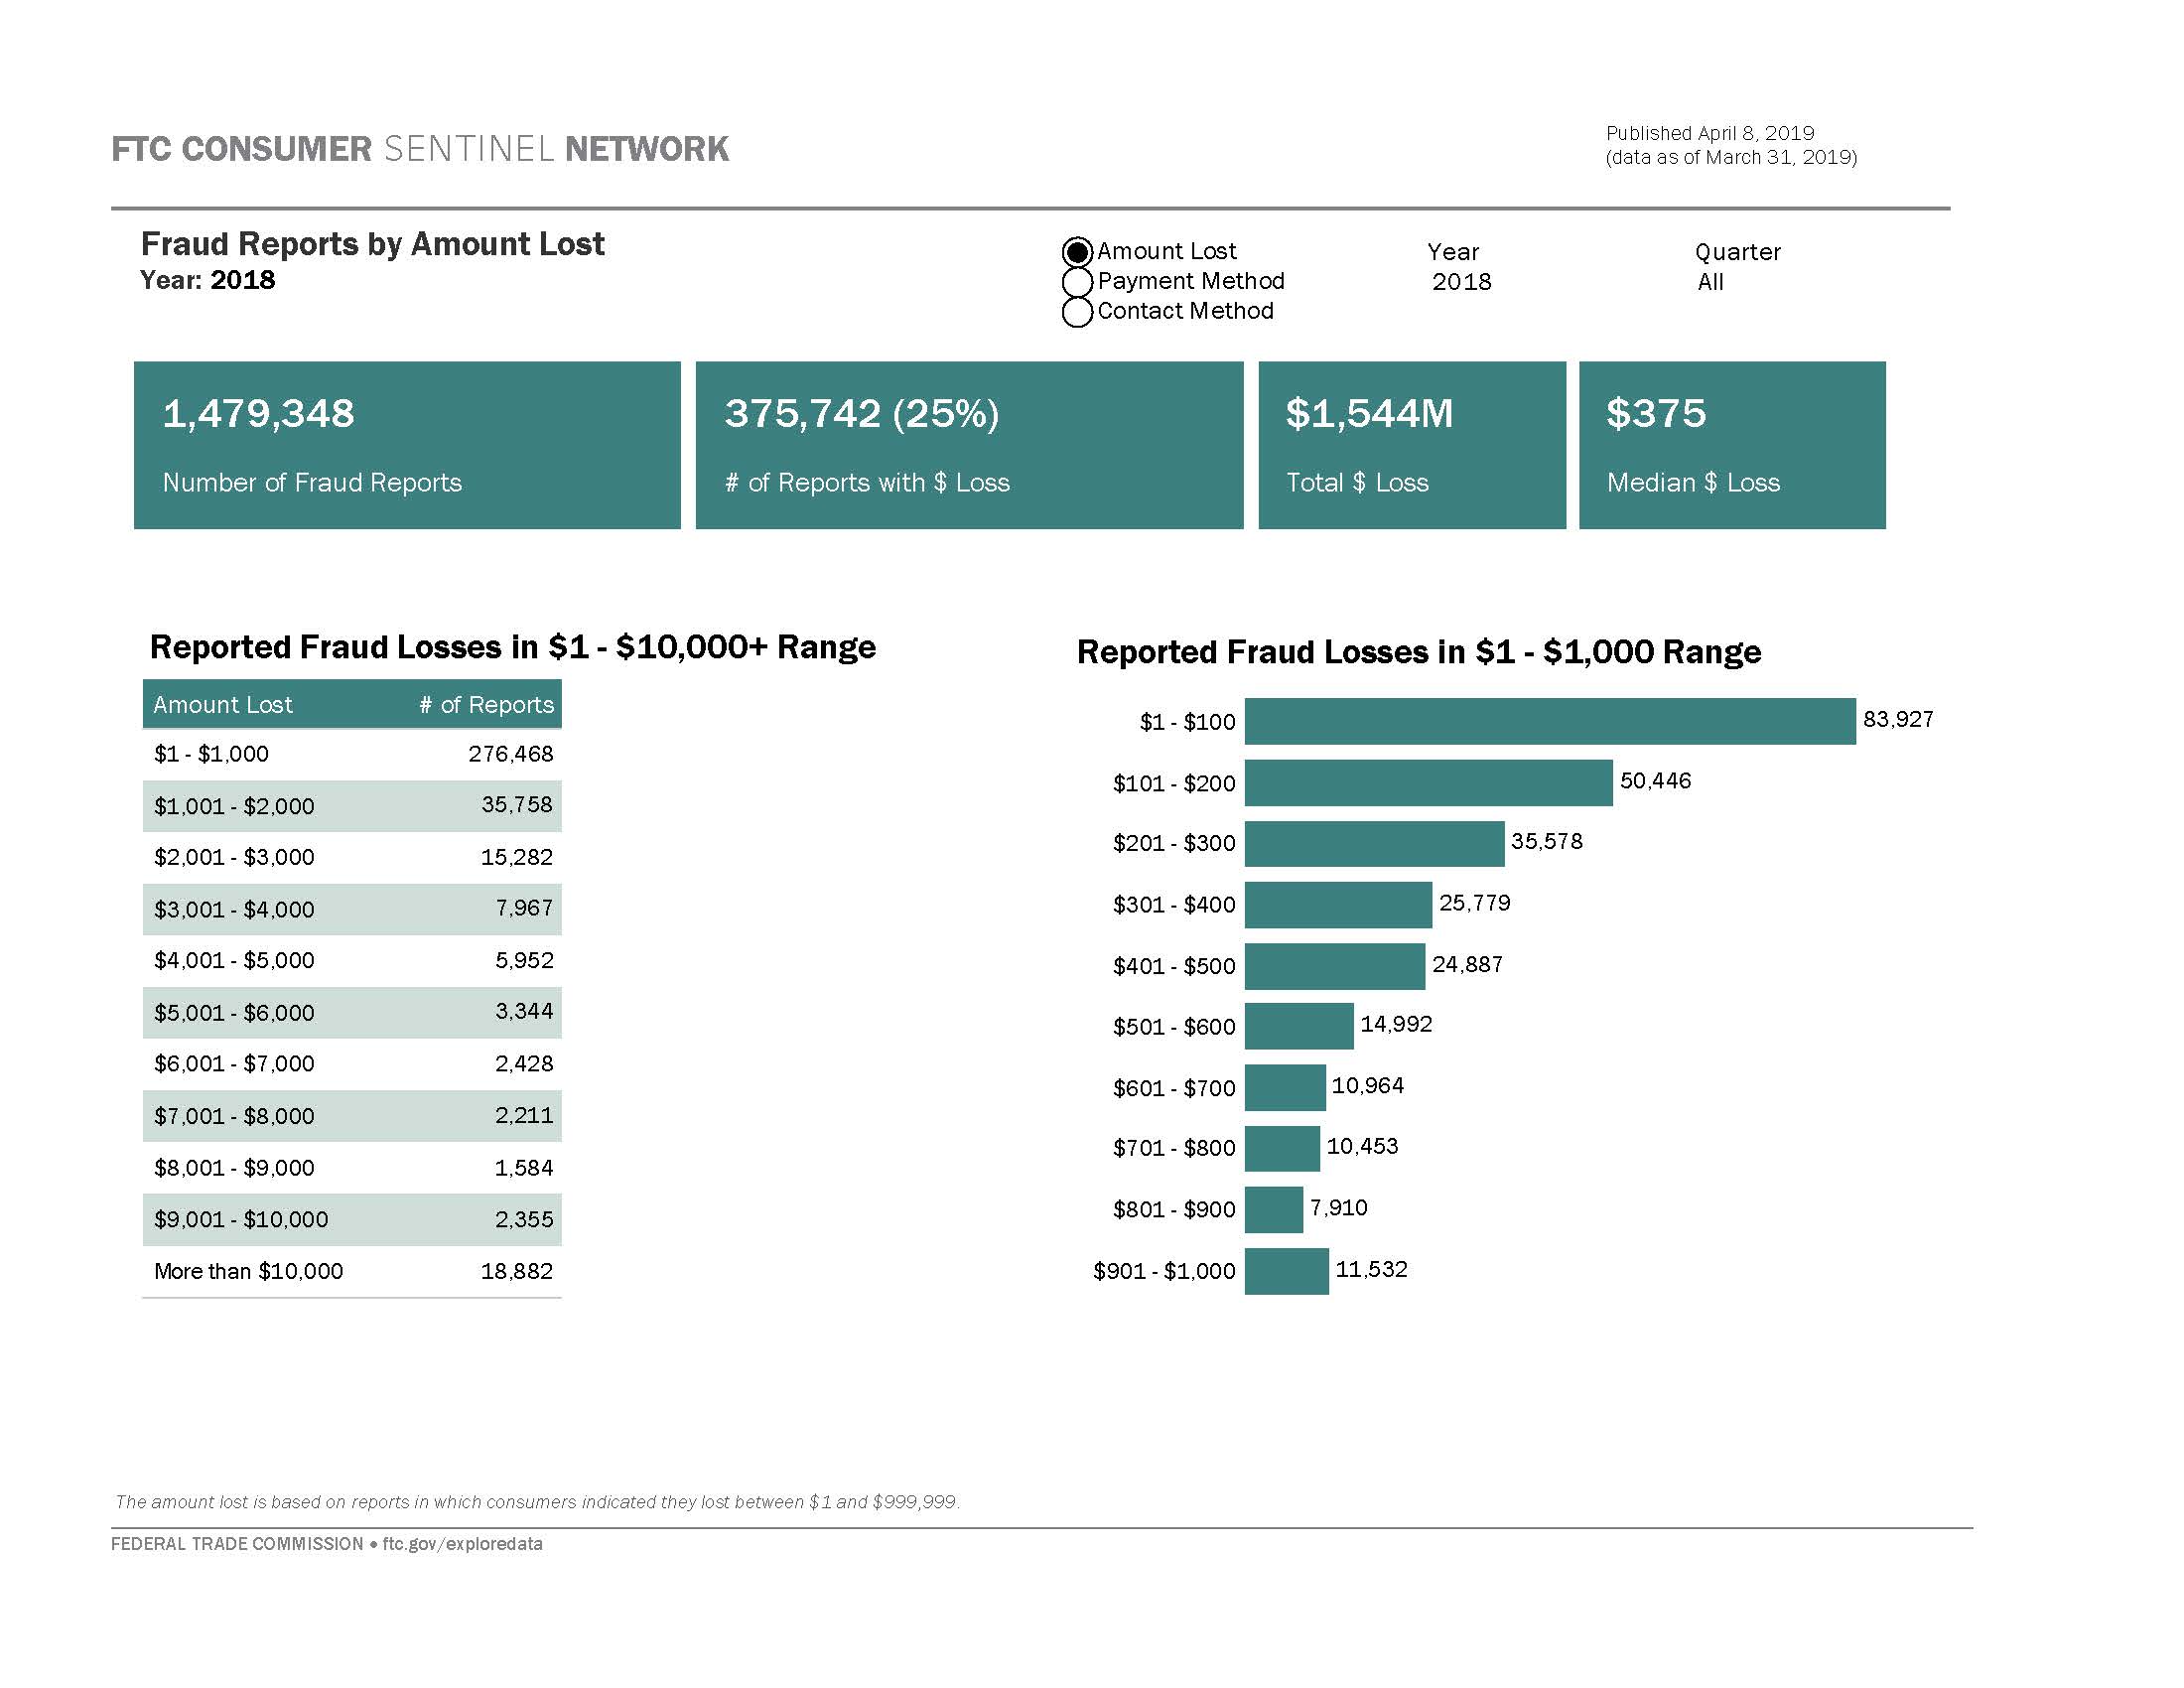 Link to interactive dashboard showing reported fraud losses, payment methods, and contact methods.